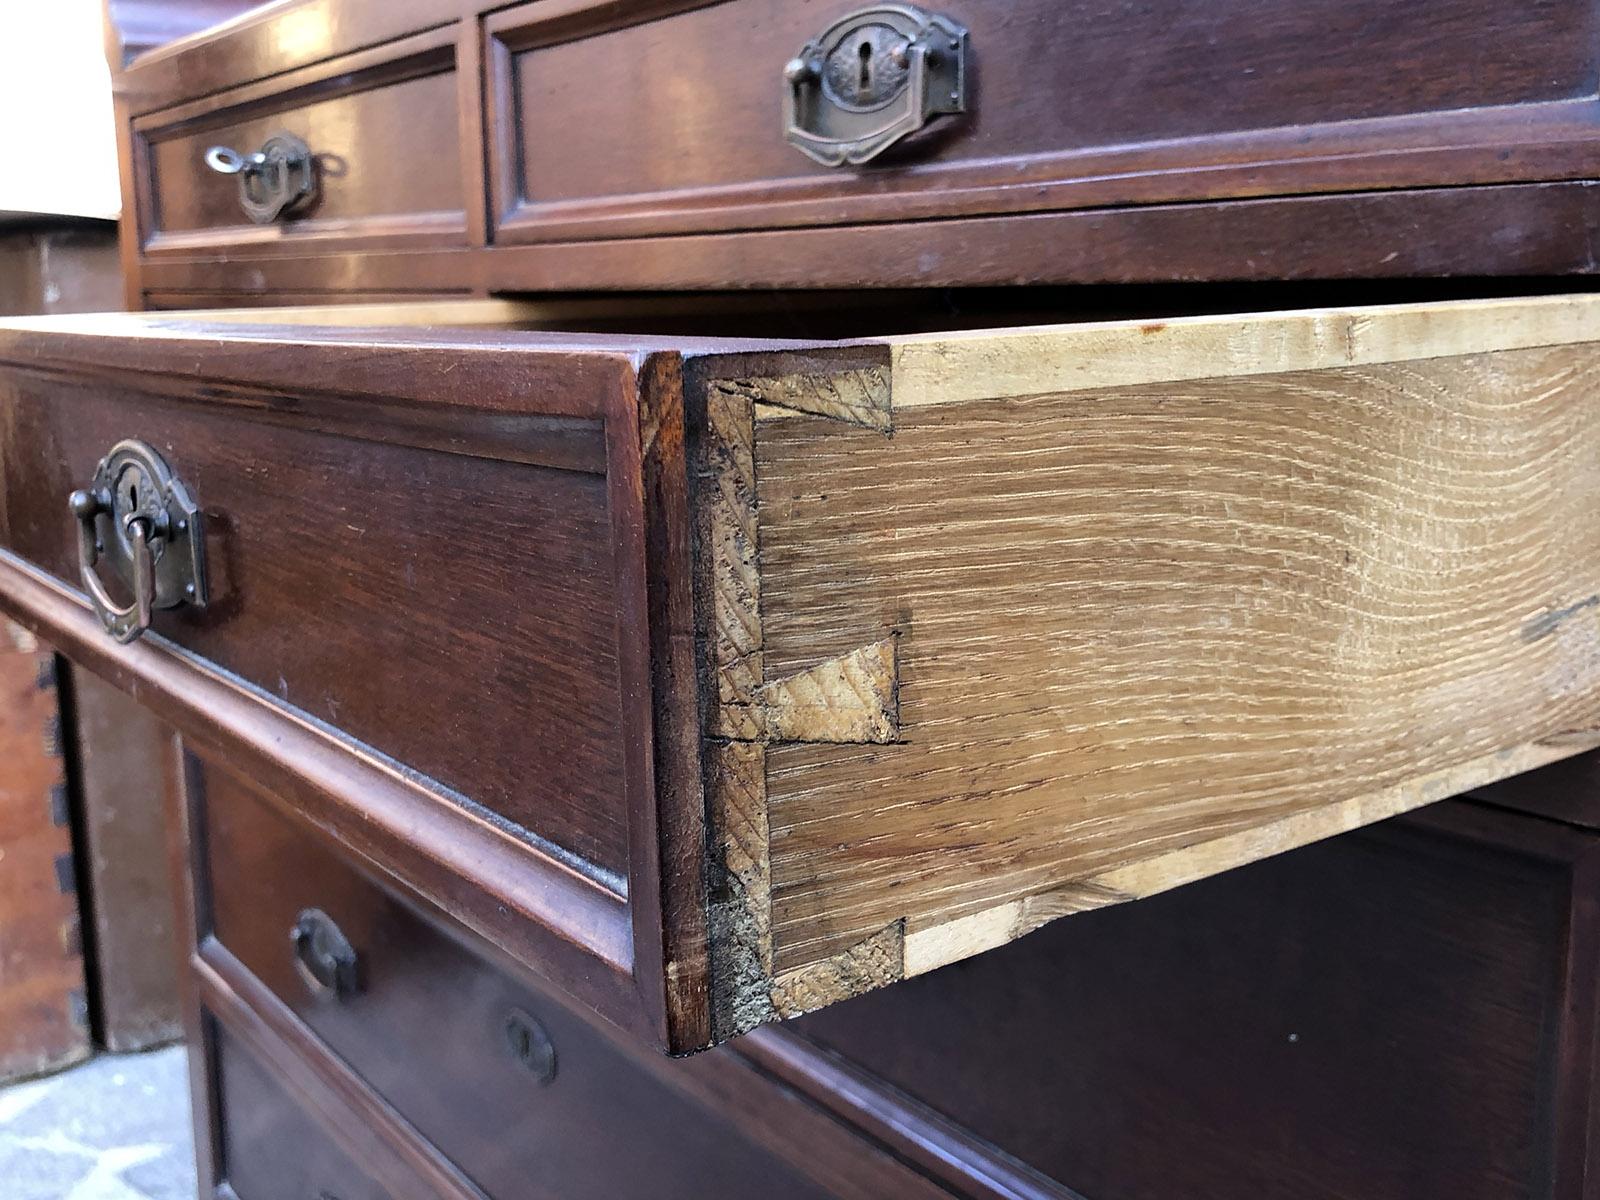 Dresser drawer in mahogany and chestnut, with original mirror and handles, Italian design and production, complete with keys.
Seven dressers, wax finiture, one of decoration has a little crack. In the upper part of the mirror there are two typical